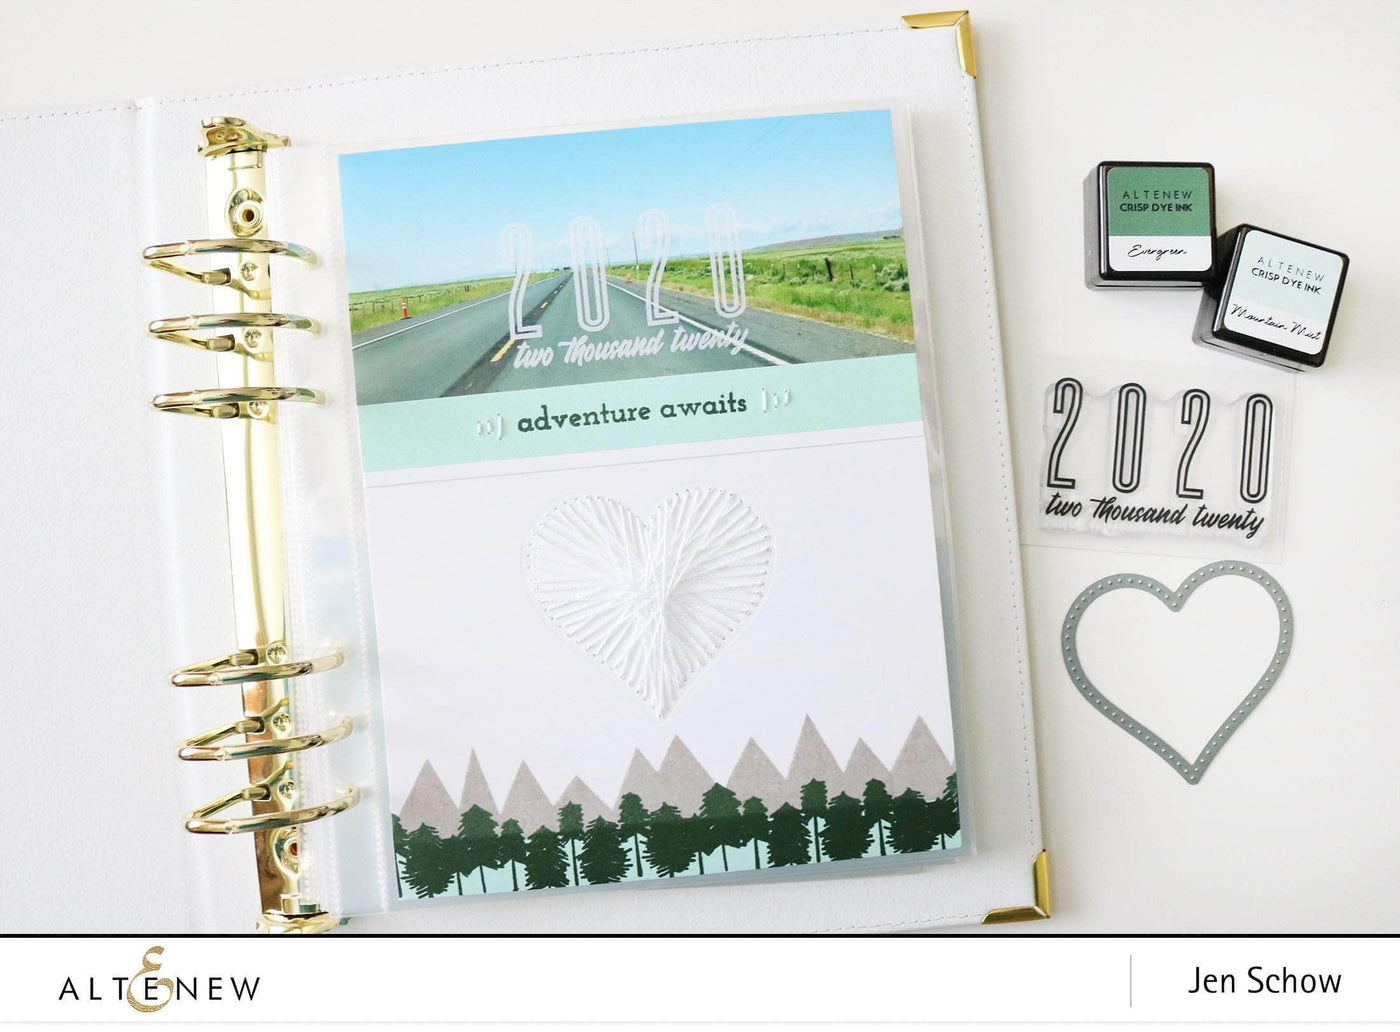 Photocentric Clear Stamps Wanderlust Stamp Set